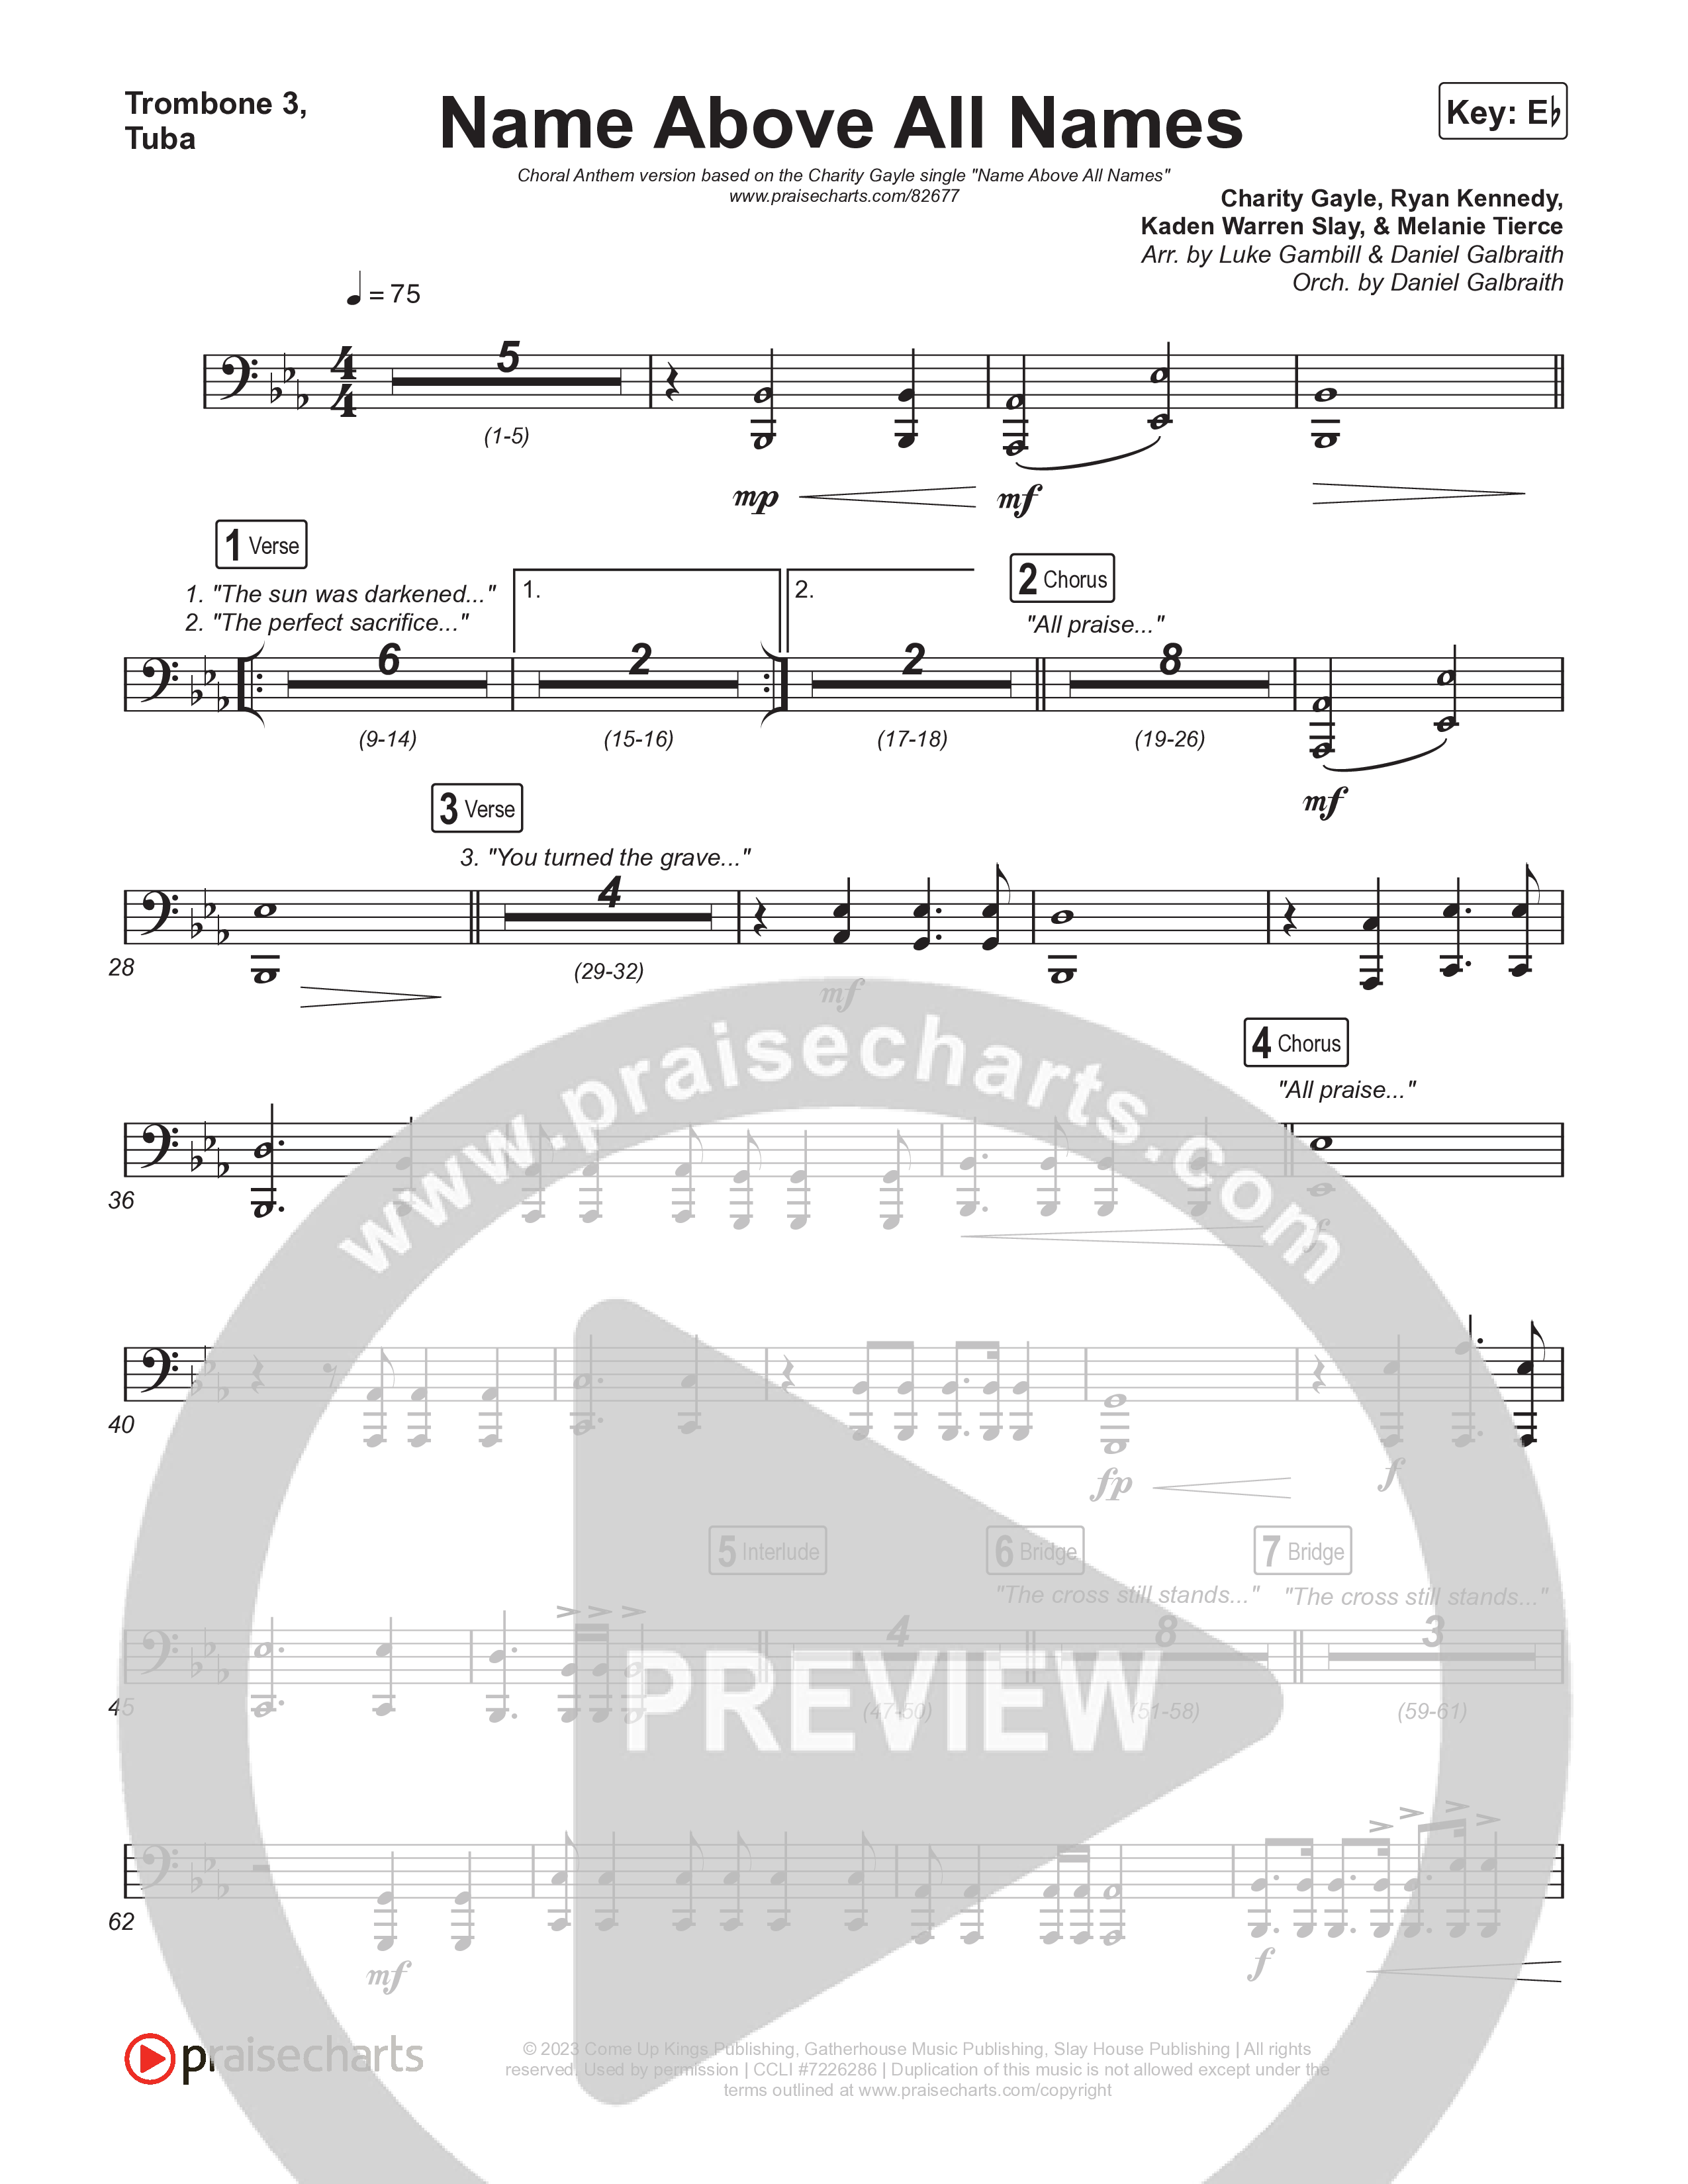 Name Above All Names (Choral Anthem SATB) Trombone 3/Tuba (Charity Gayle / Arr. Luke Gambill)